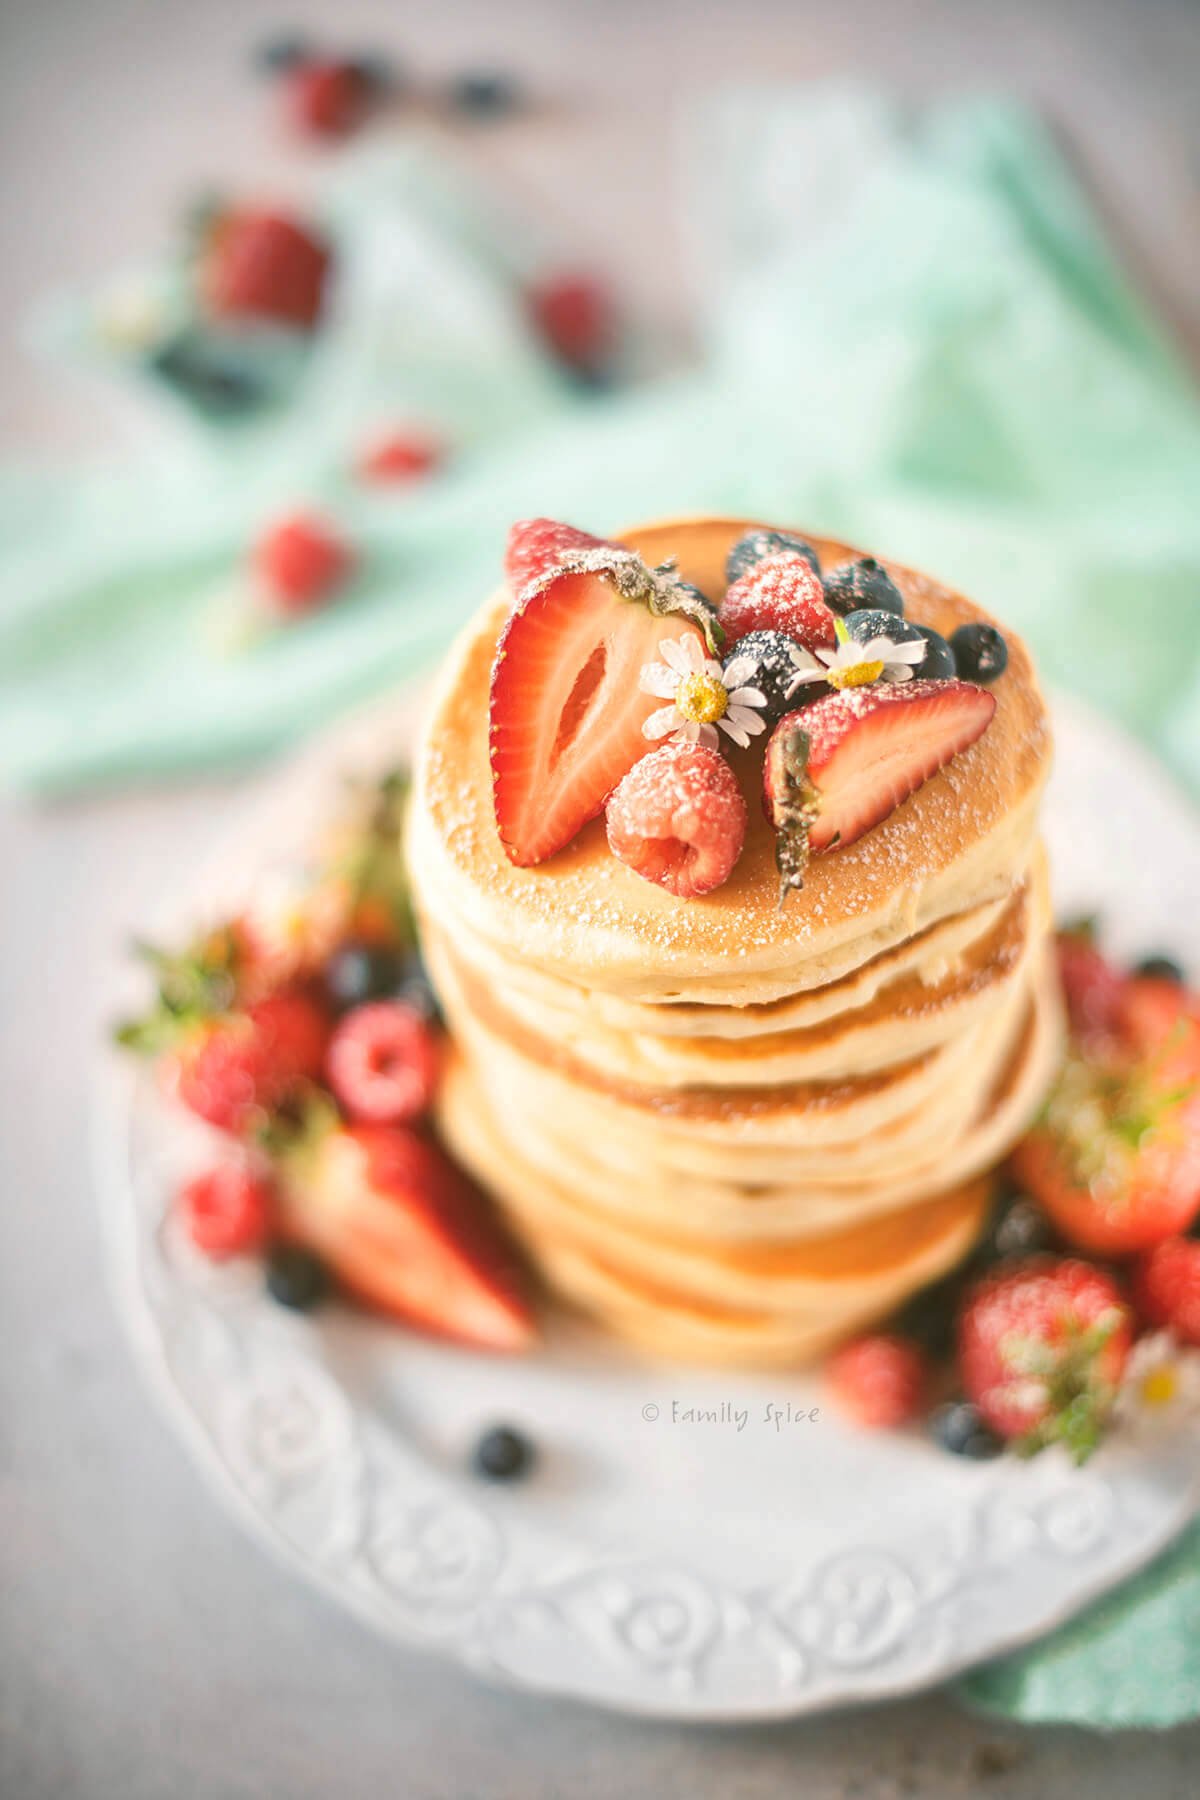 Top view of a stack of yogurt pancakes topped and surrounded with fresh berries